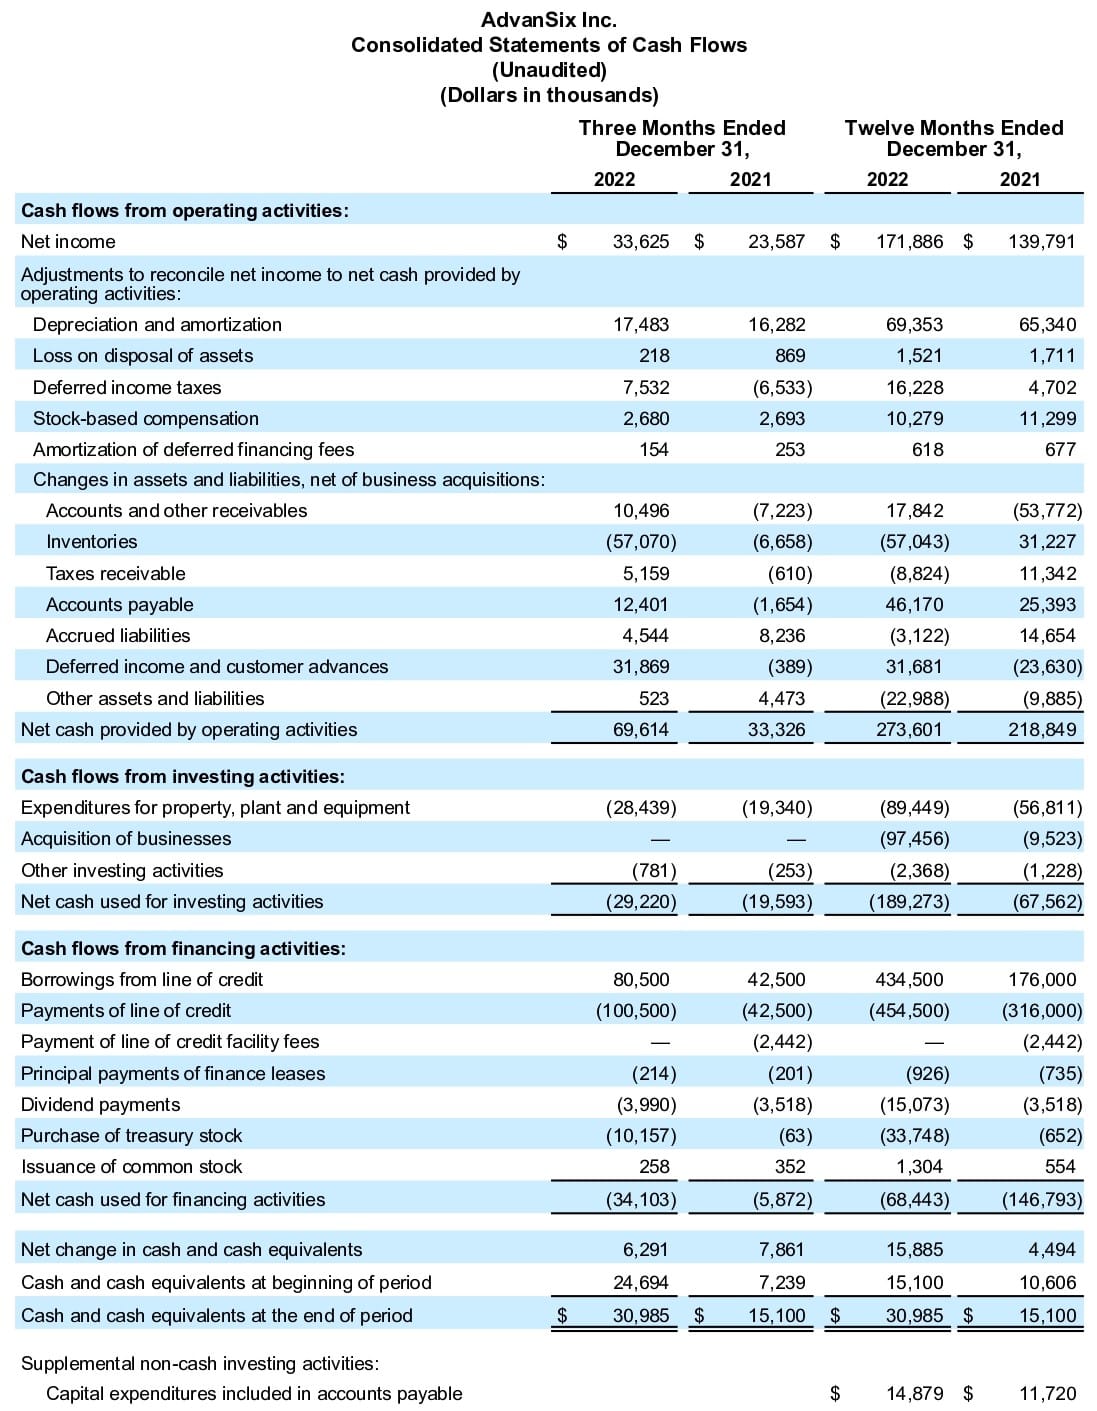 Table - AdvanSix Inc. Consolidated Statements of Cash Flows Fourth Quarter And Full Year 2022 Financial Results (Unaudited) (Dollars in thousands)